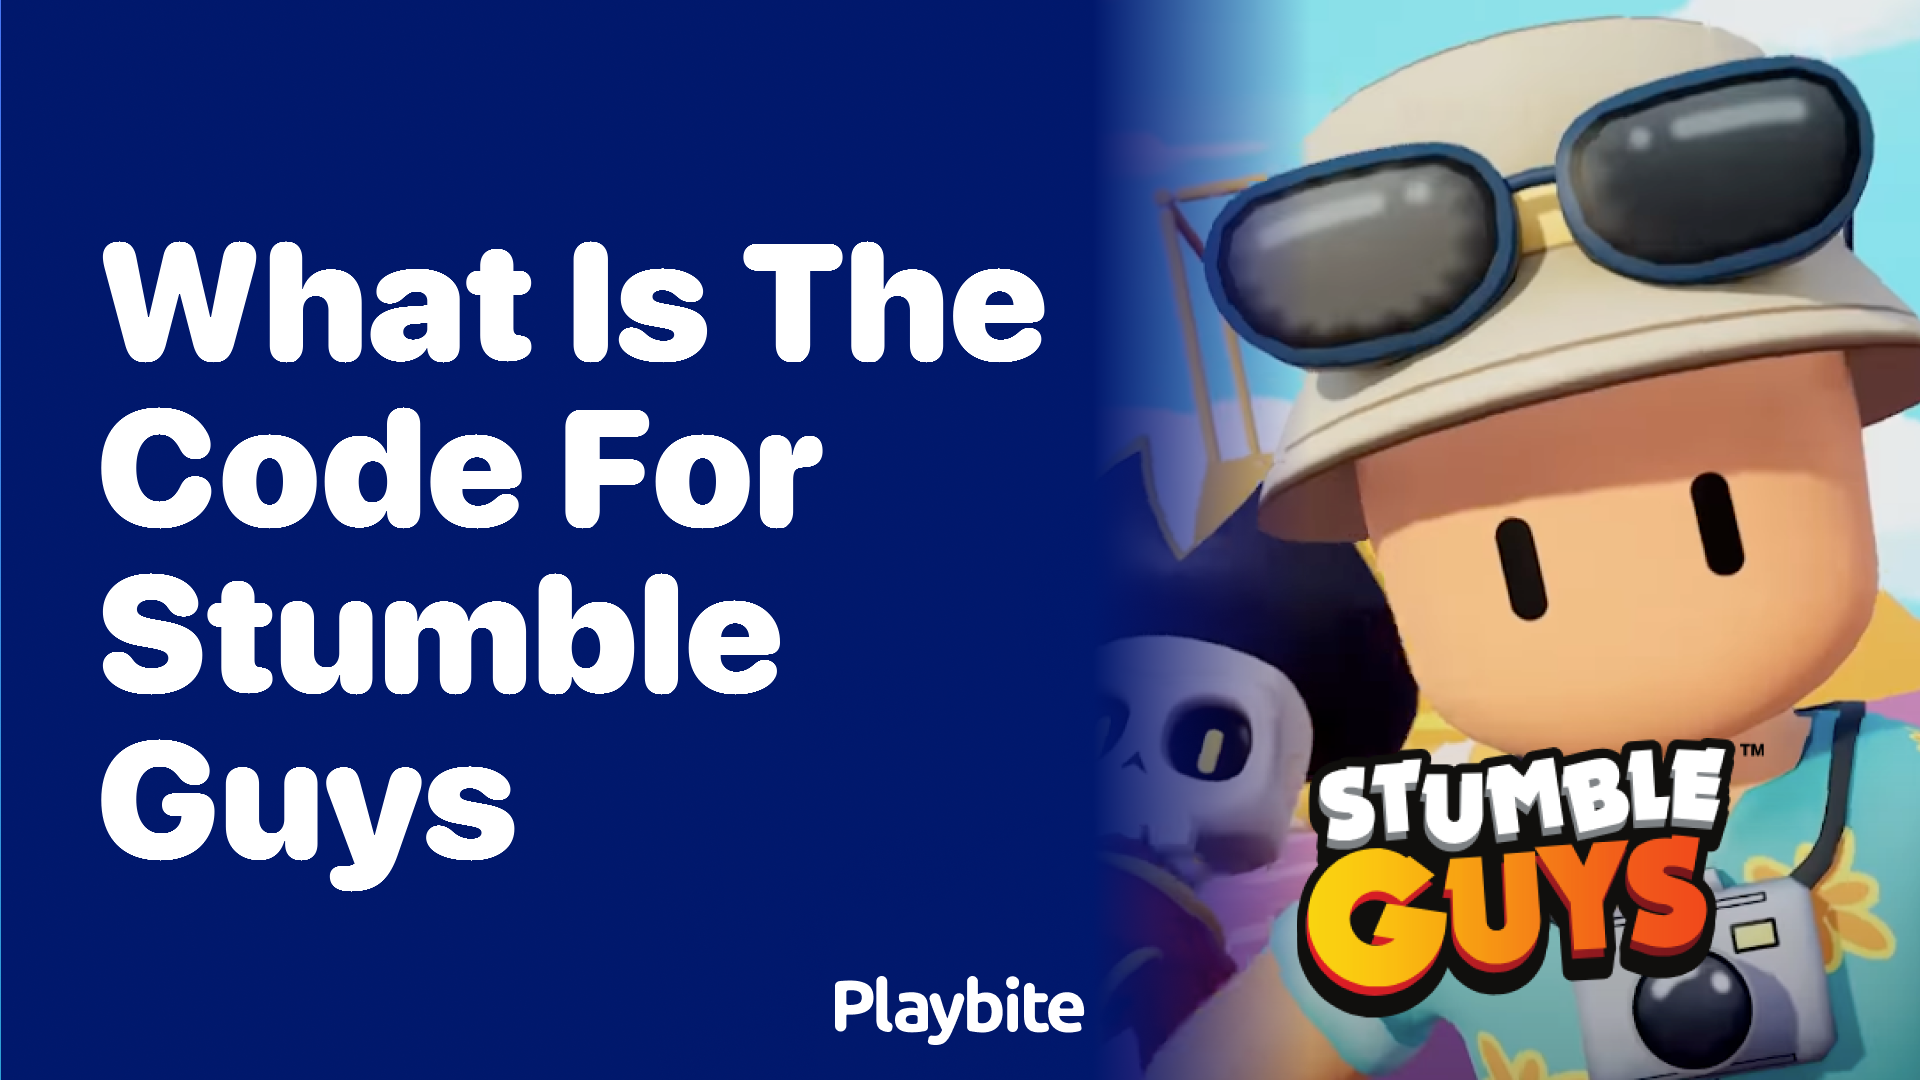 What is the code for Stumble Guys?